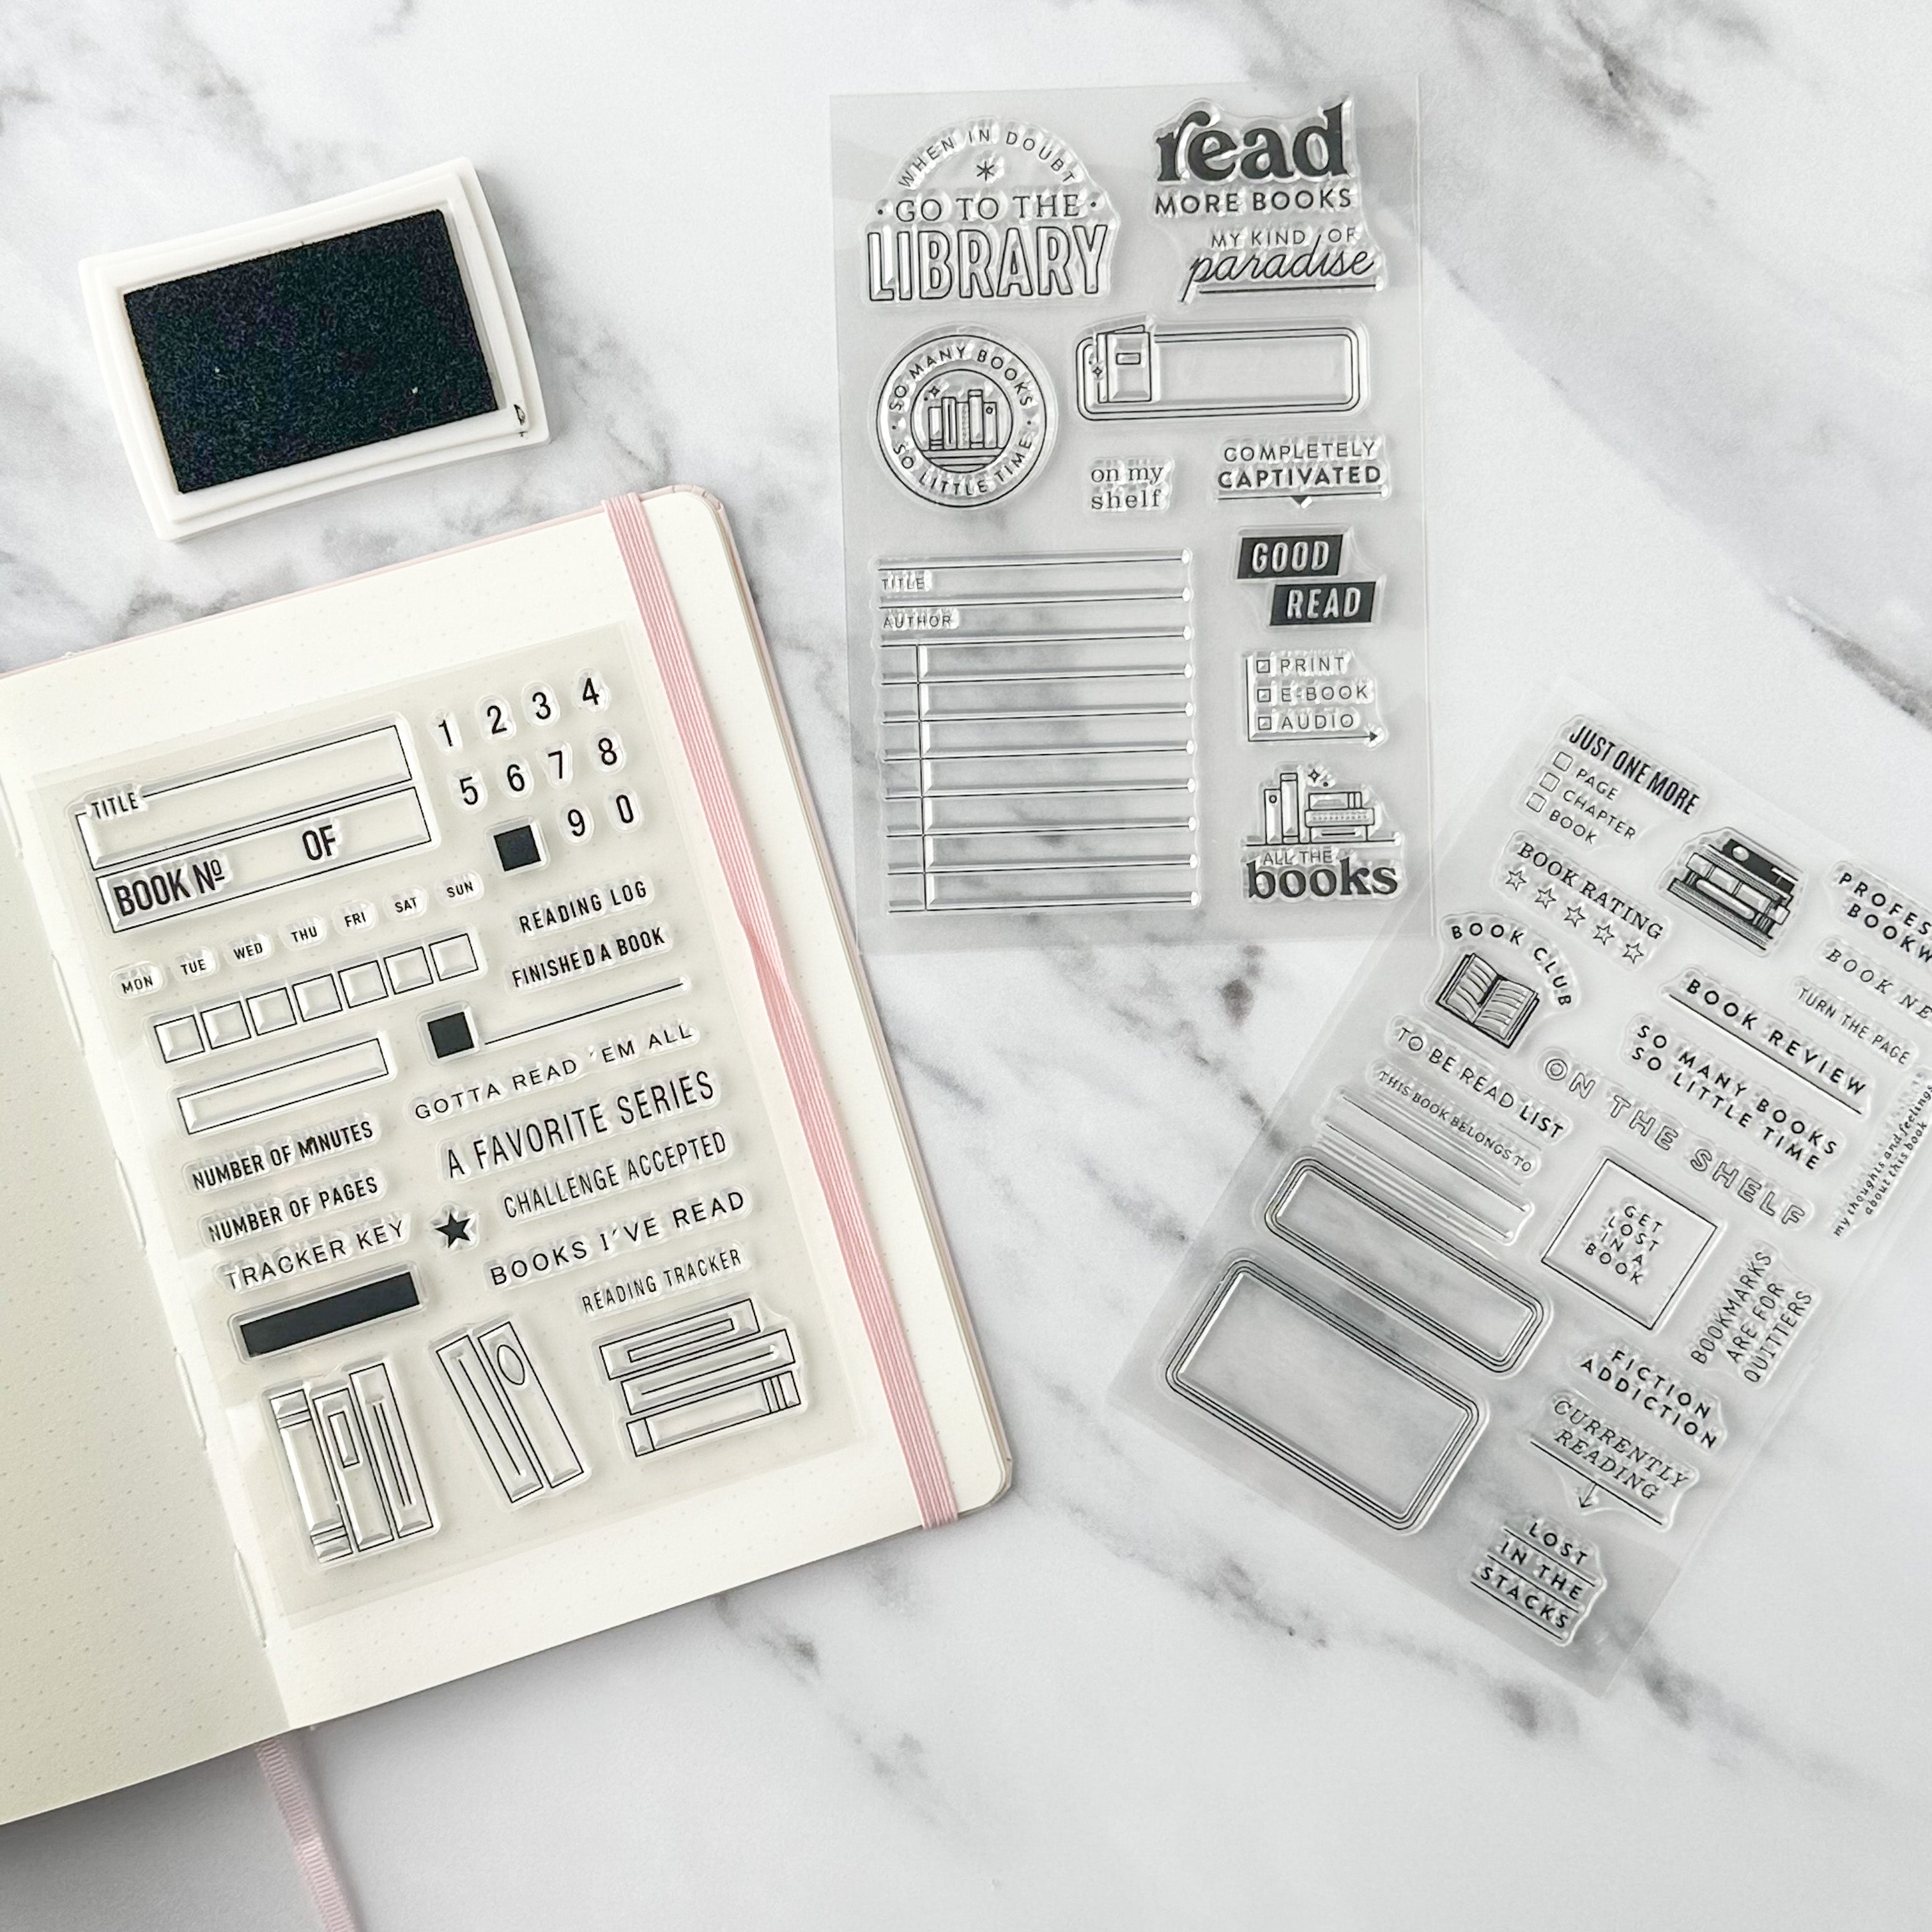 Organize your reading life with these handy stamps! Keep track of books you've read, rate them, jot down key points, and more. Perfect for book lovers who want to create a personalized reading log in their planner or journal. These stamps are sold at BBB Supplies Craft Shop.